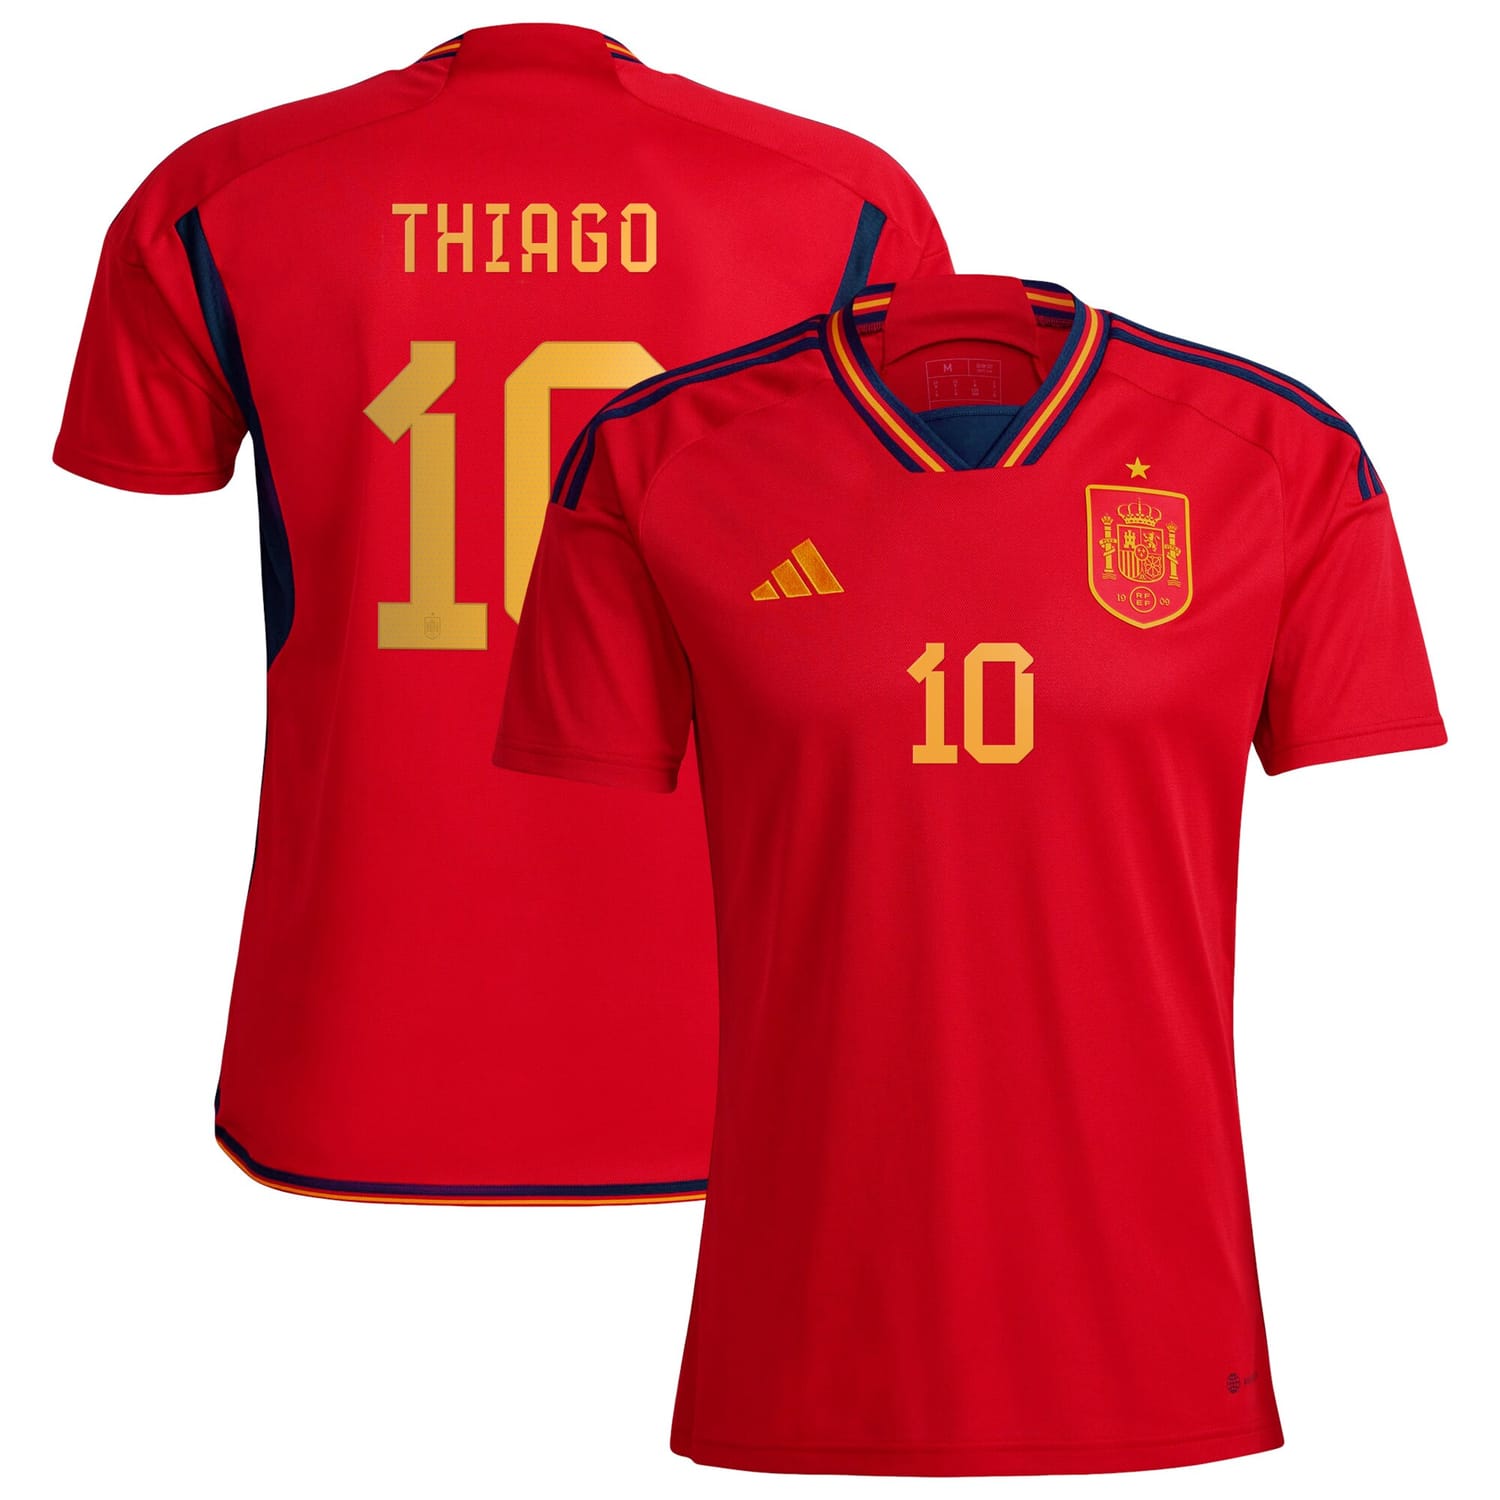 Spain National Team Home Jersey Shirt player Thiago 10 printing for Men